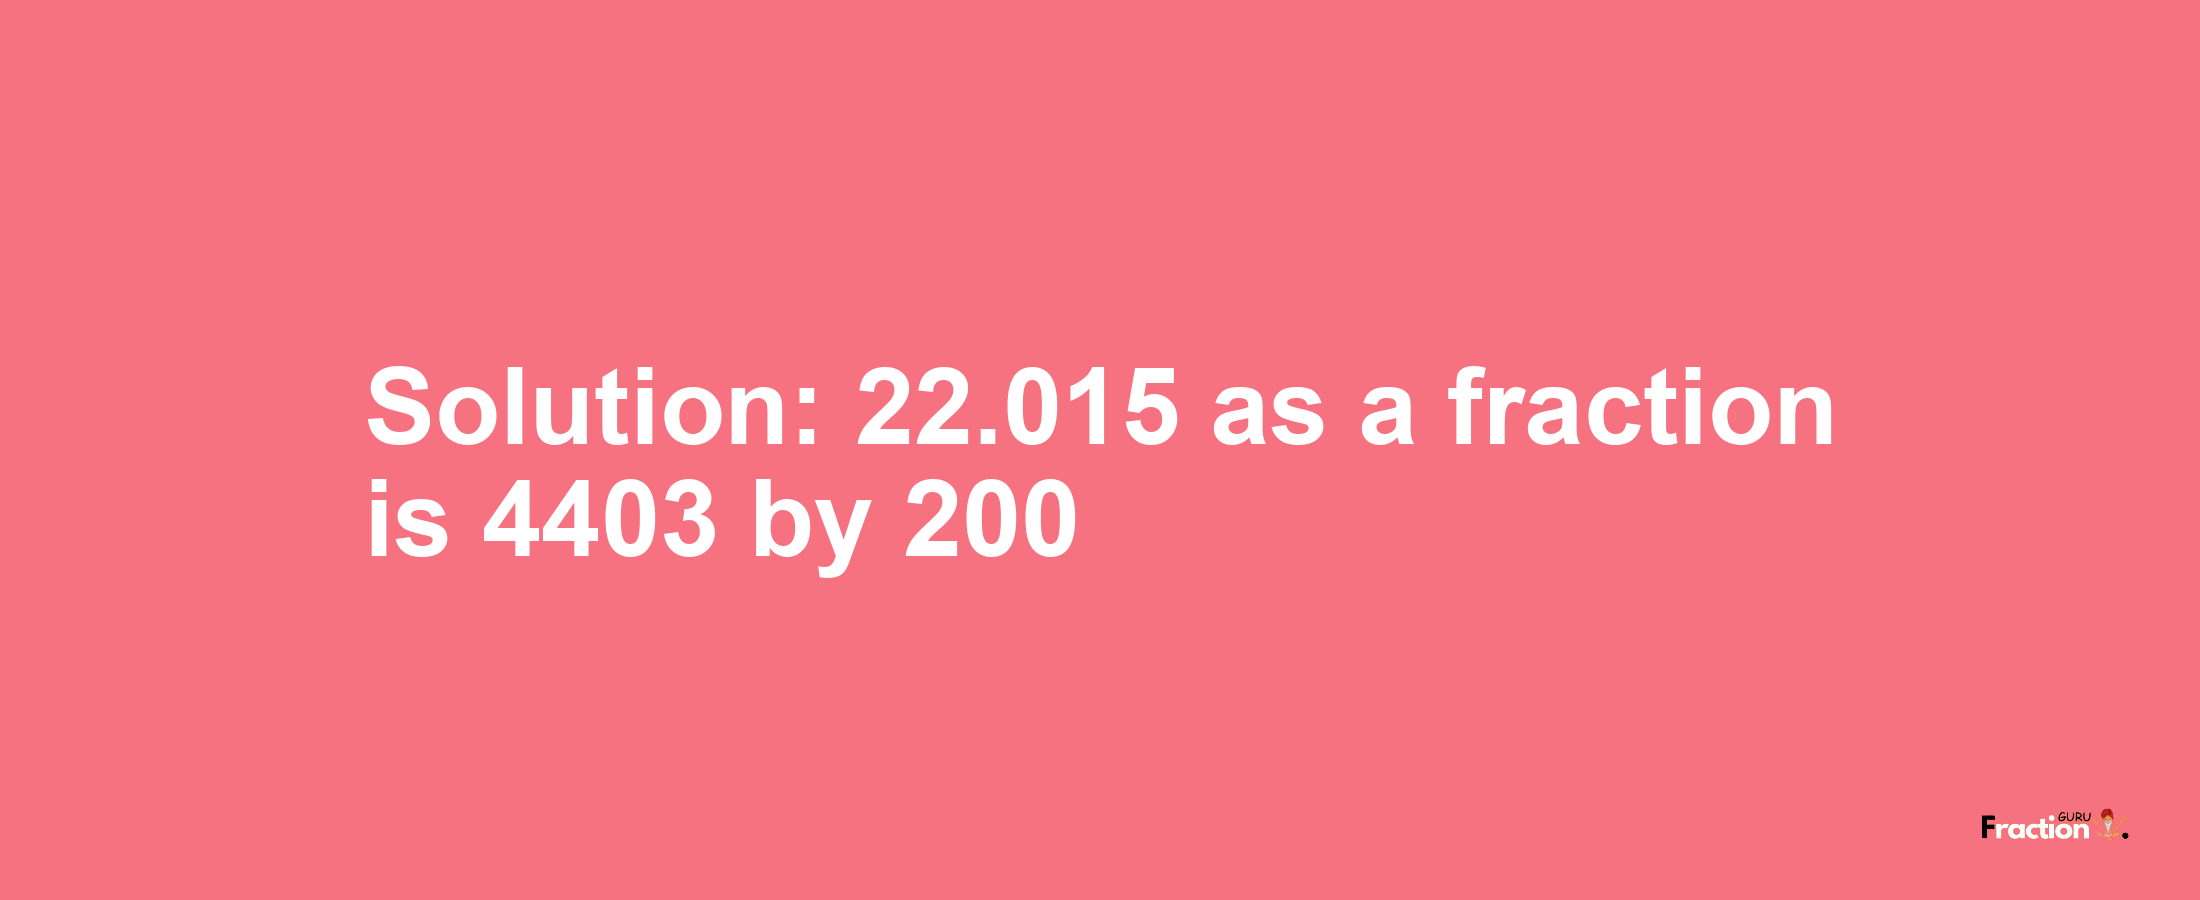 Solution:22.015 as a fraction is 4403/200